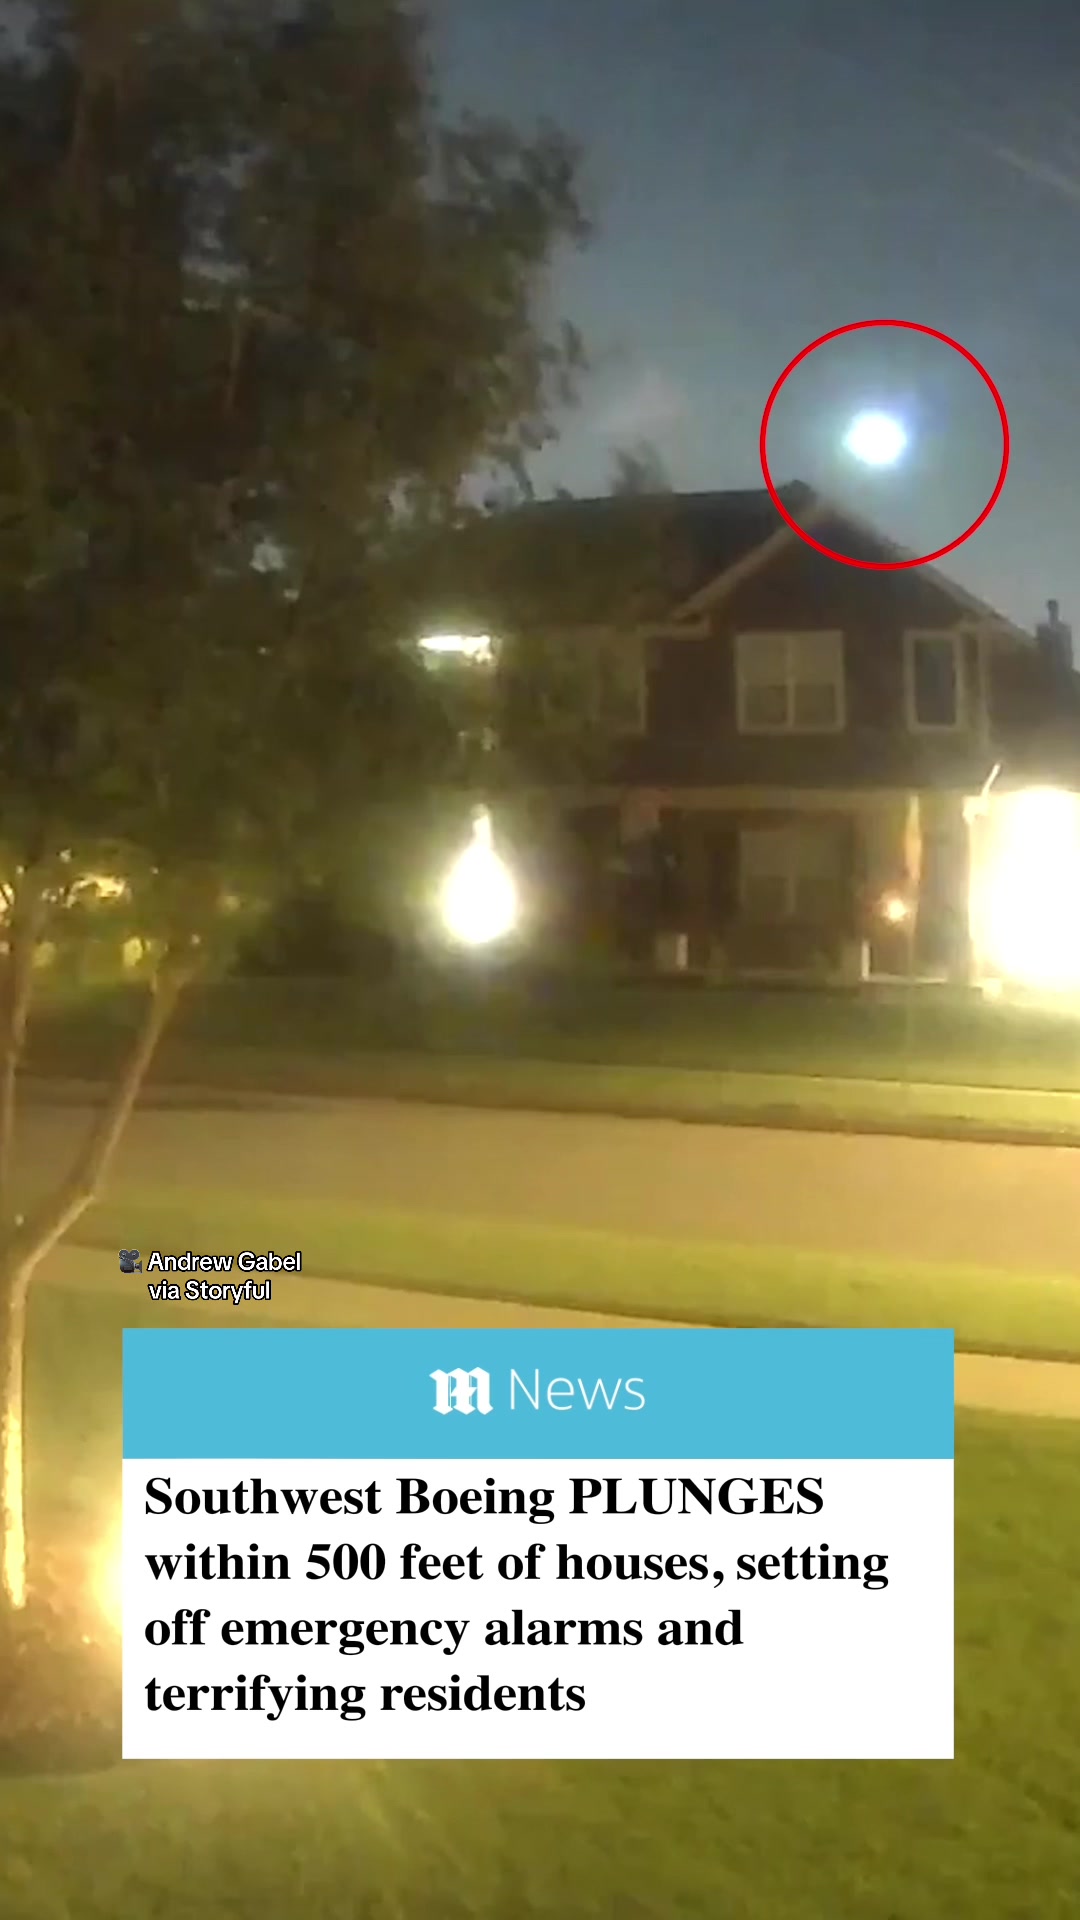 This was the TERRIFYING moment a Southwest Boeing aircraft PLUNGED within 500 feet of houses in Oklahoma. The plane regained altitude and landed safely, and now Southwest officials are working with the Federal Aviation Administration to determine what caused the sudden descent.  🎥 Andrew Gabel via Storyful  #boeing #plane #southwest #oklamhoma #news #scary